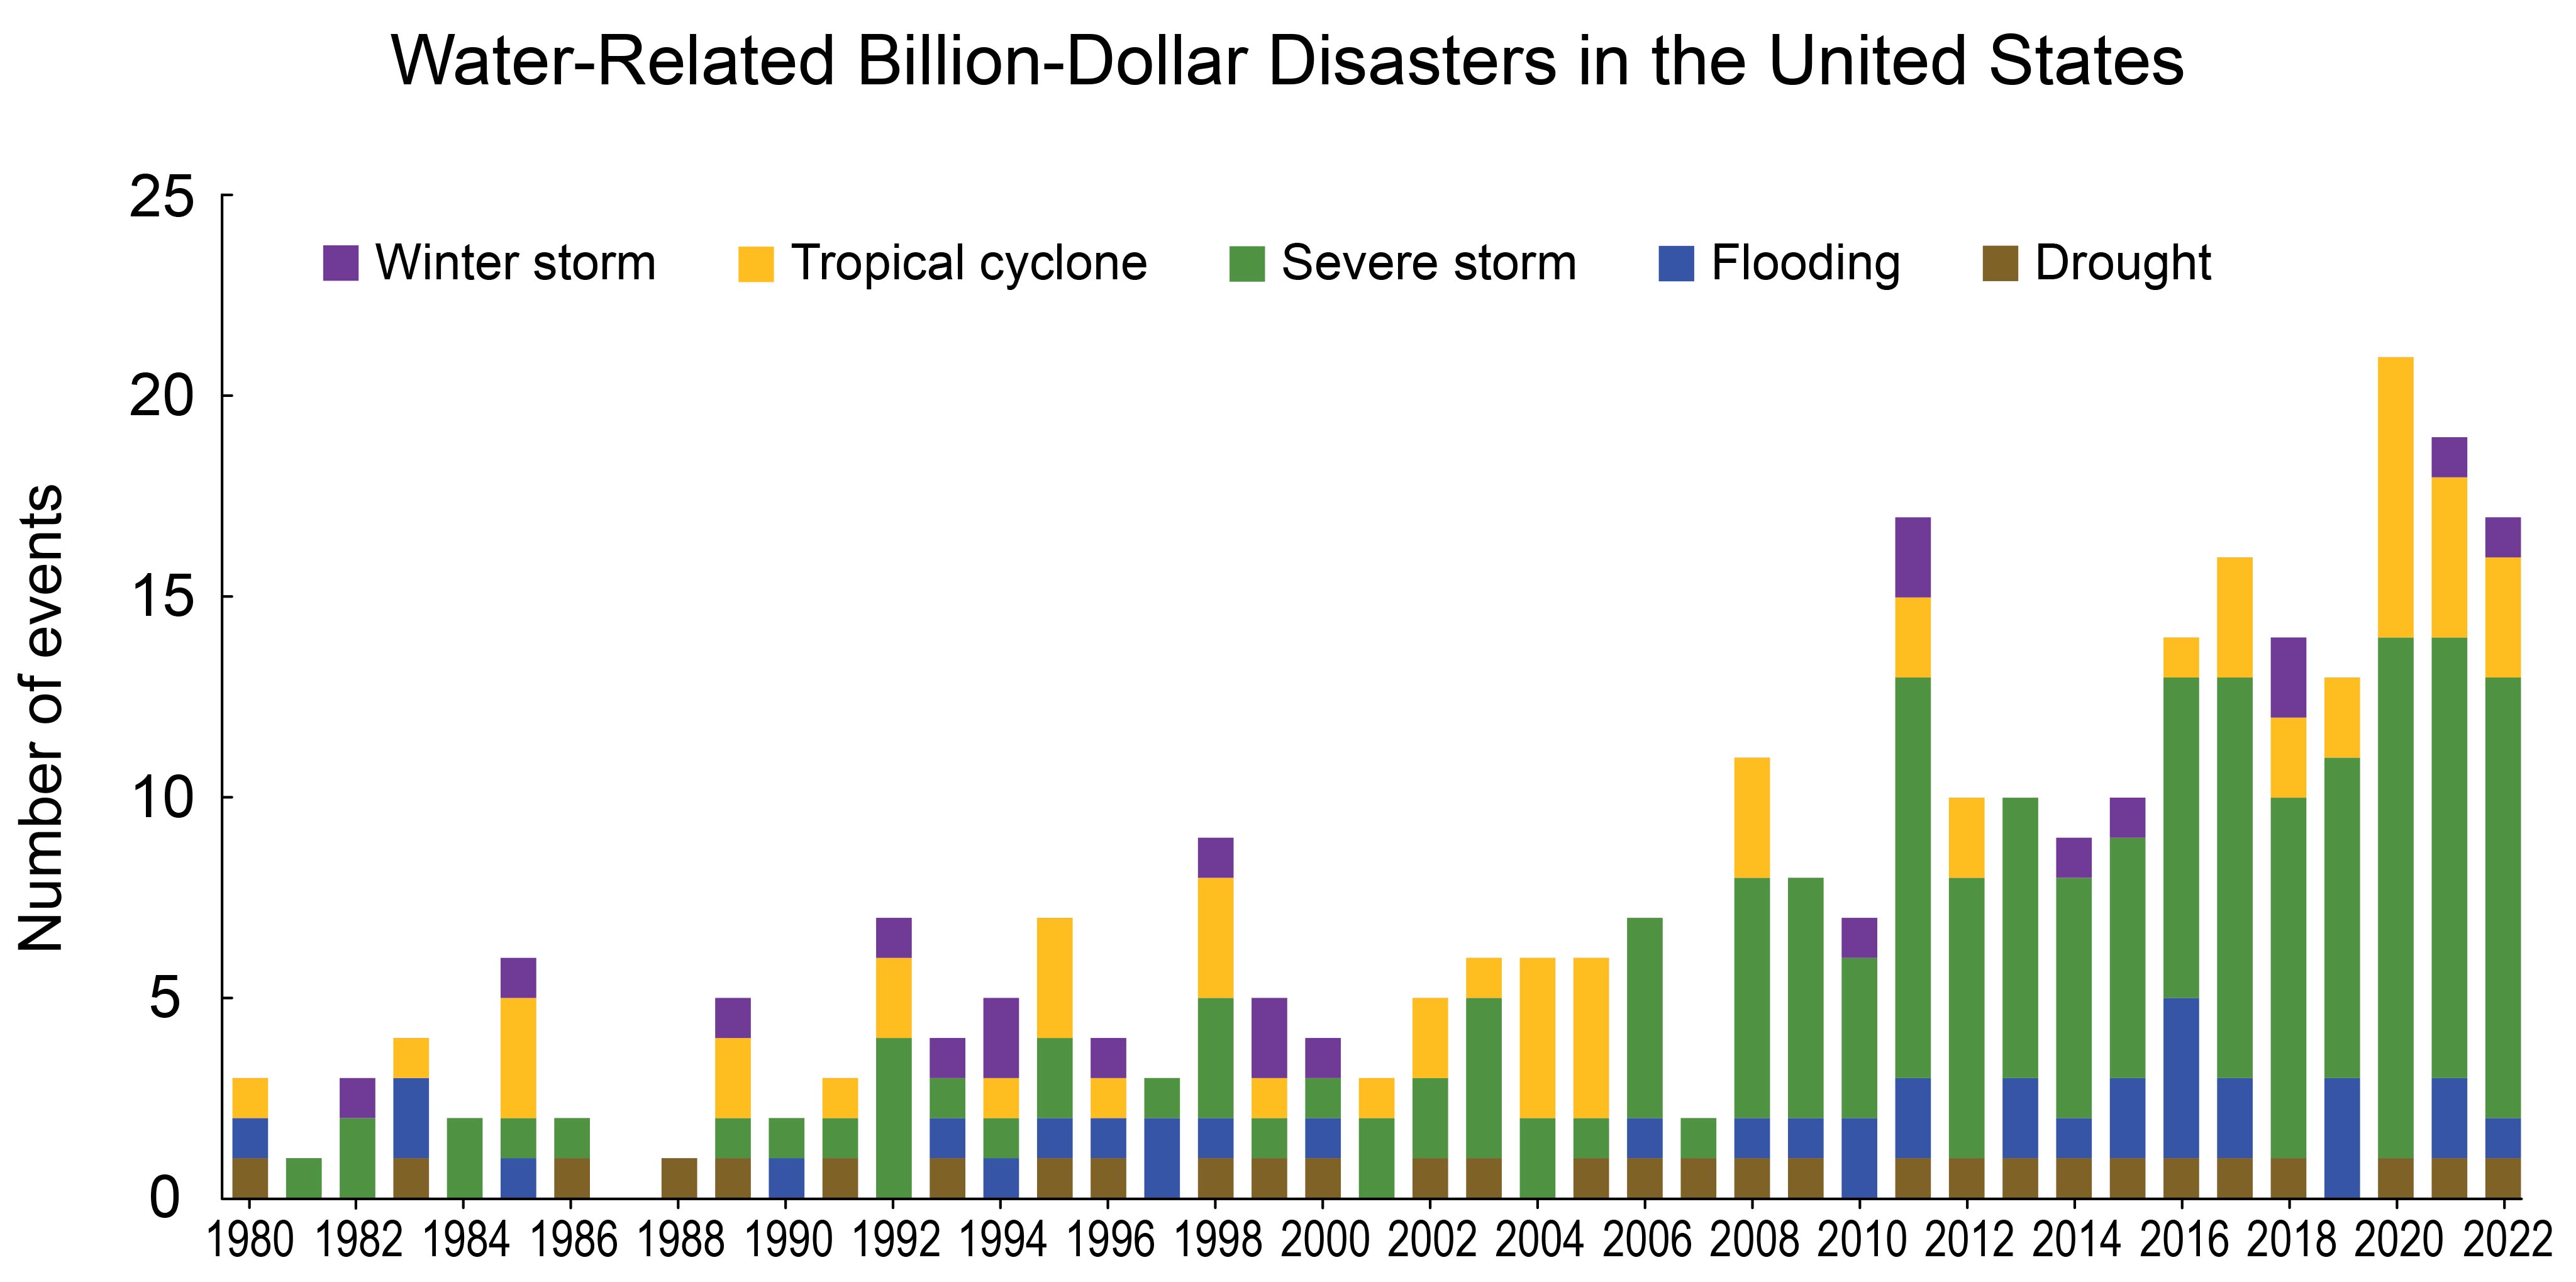 Water-Related Billion-Dollar Disasters in the United States